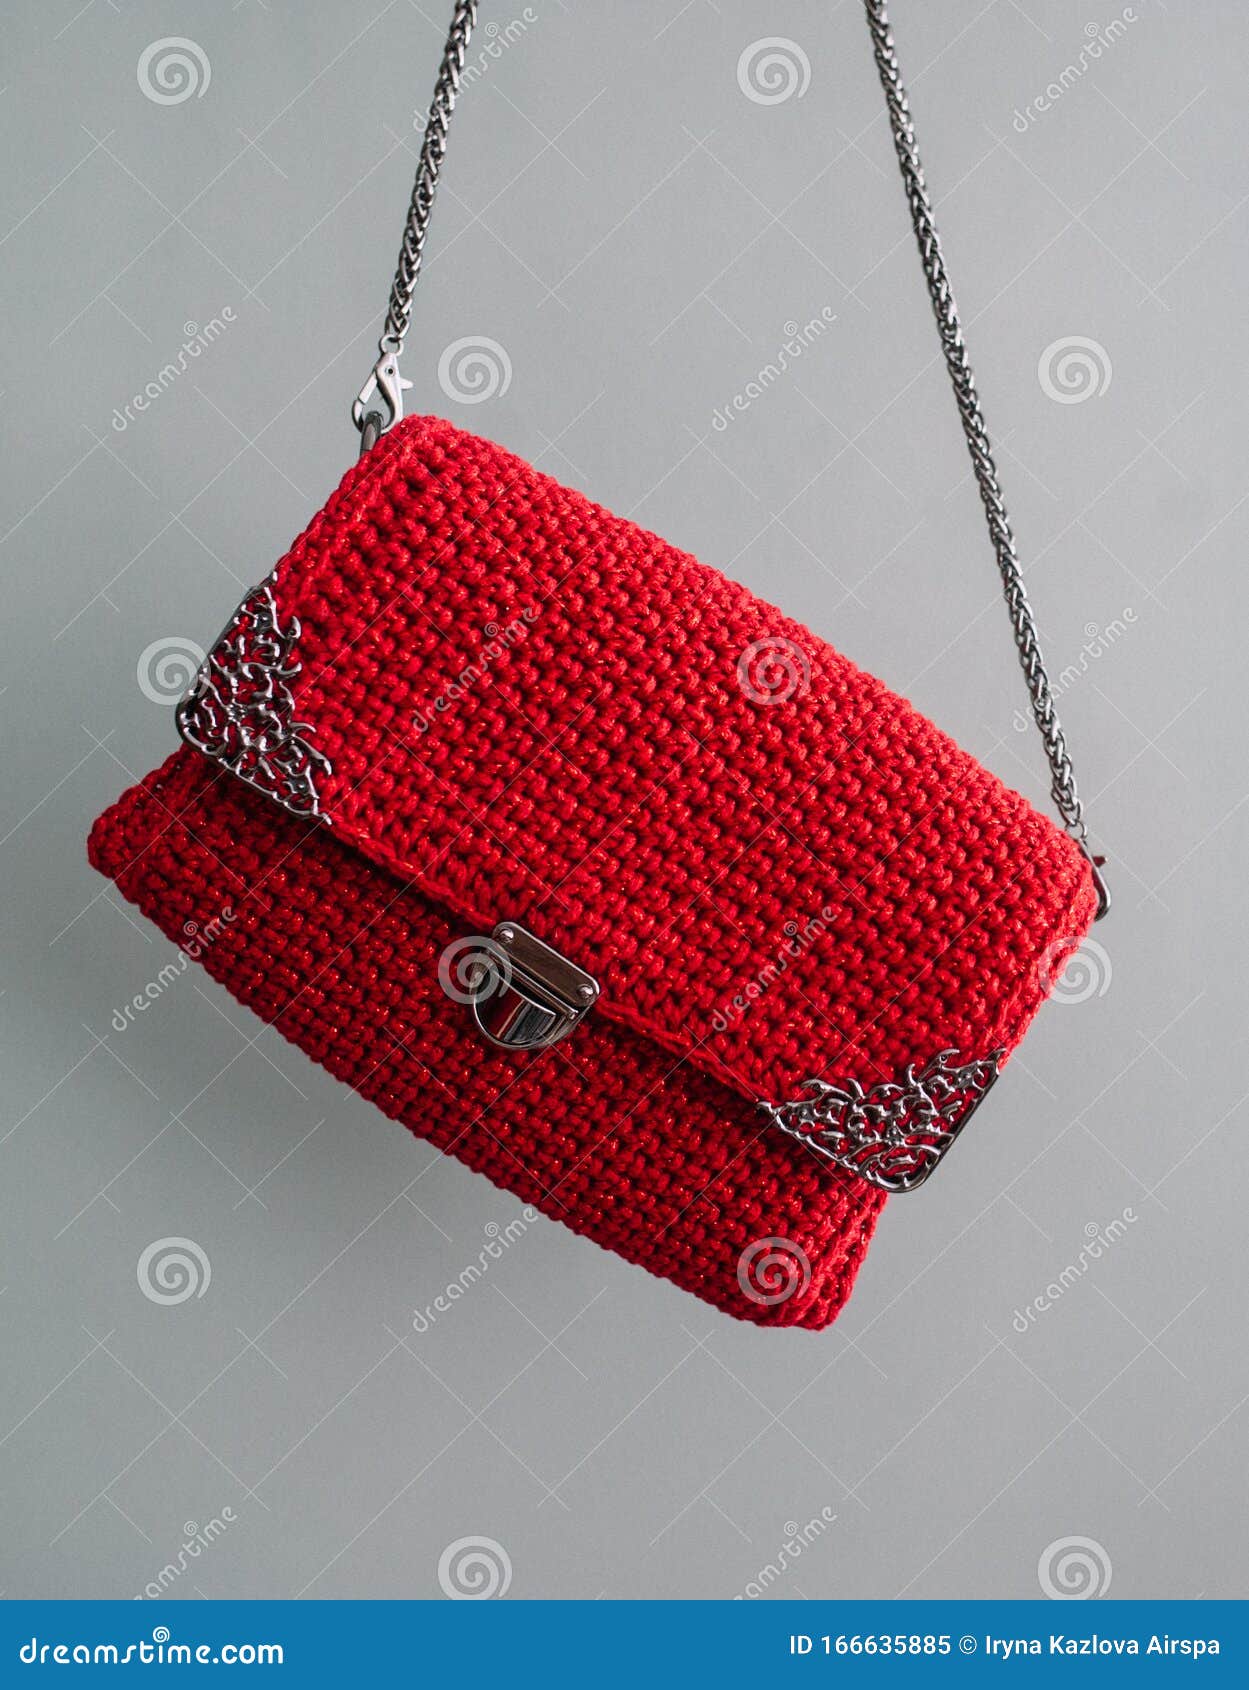 Red Crochet Knitted Bag ,made from Nylon Thread Isolated on Gray Background  Stock Image - Image of lady, girl: 166635885